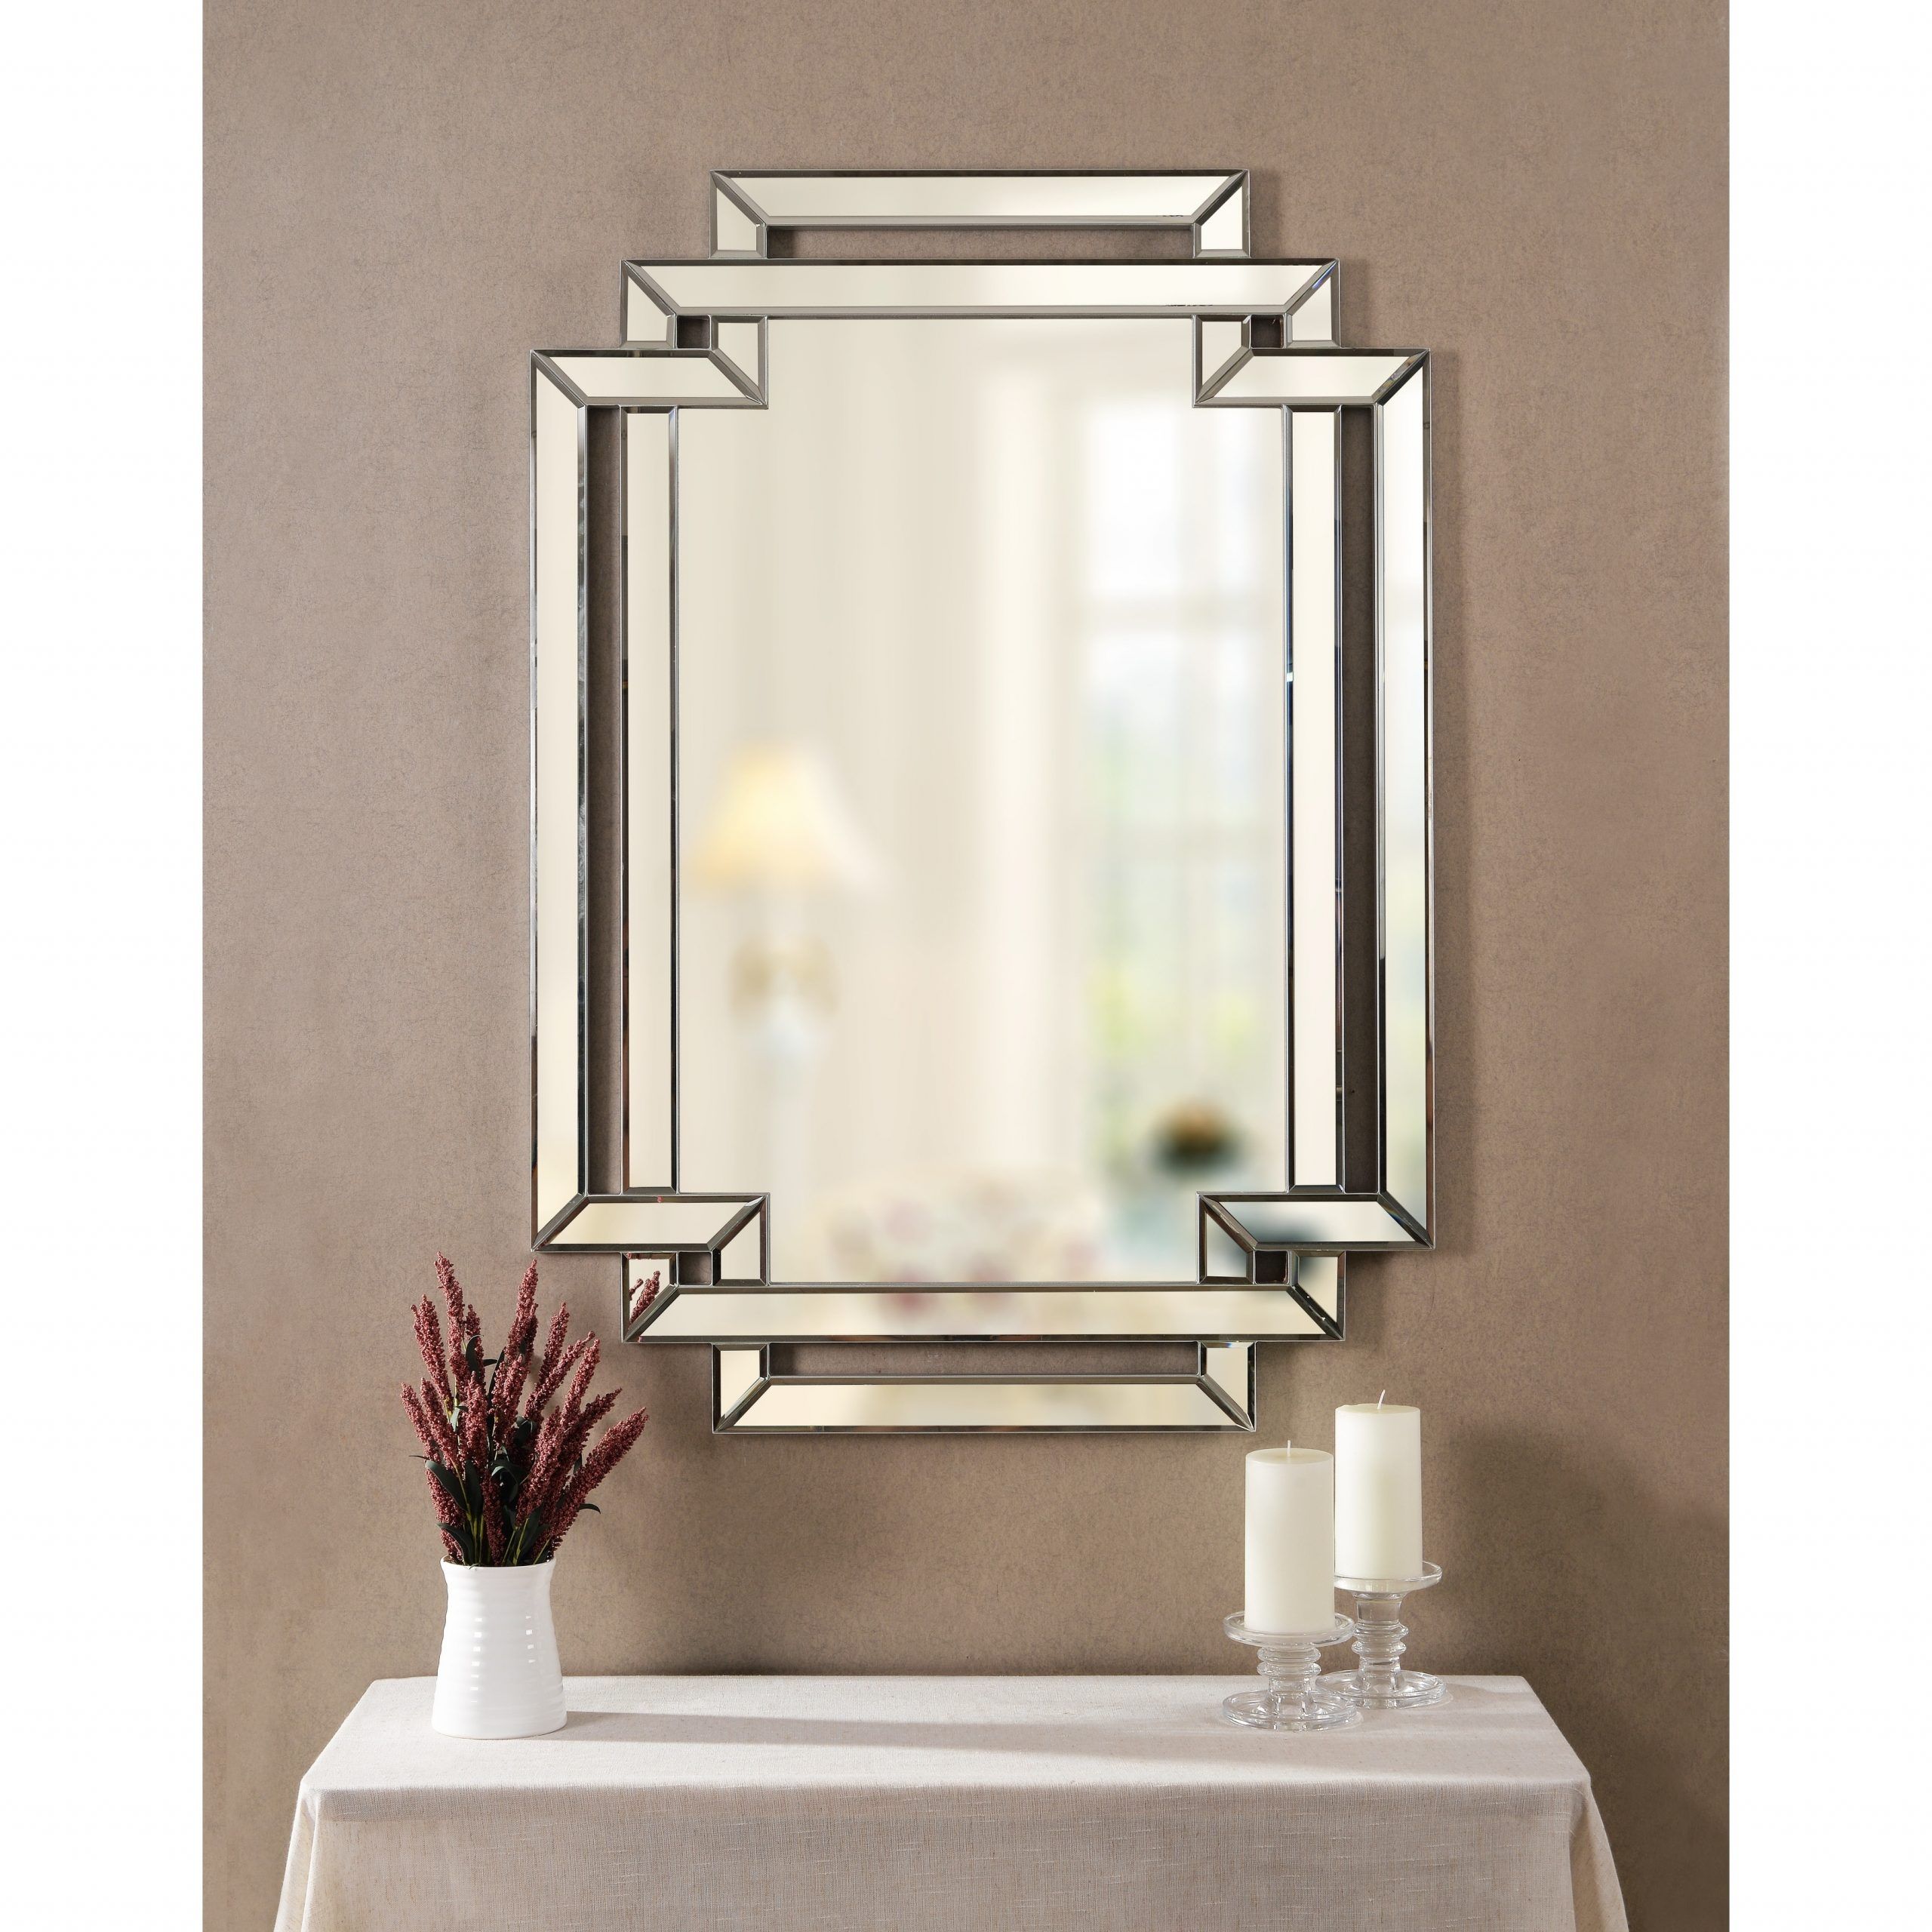 Shop Ryleigh 44" Rectangular Beveled Wall Mirror – Free Shipping Today Intended For Widely Used Square Oversized Wall Mirrors (View 2 of 15)